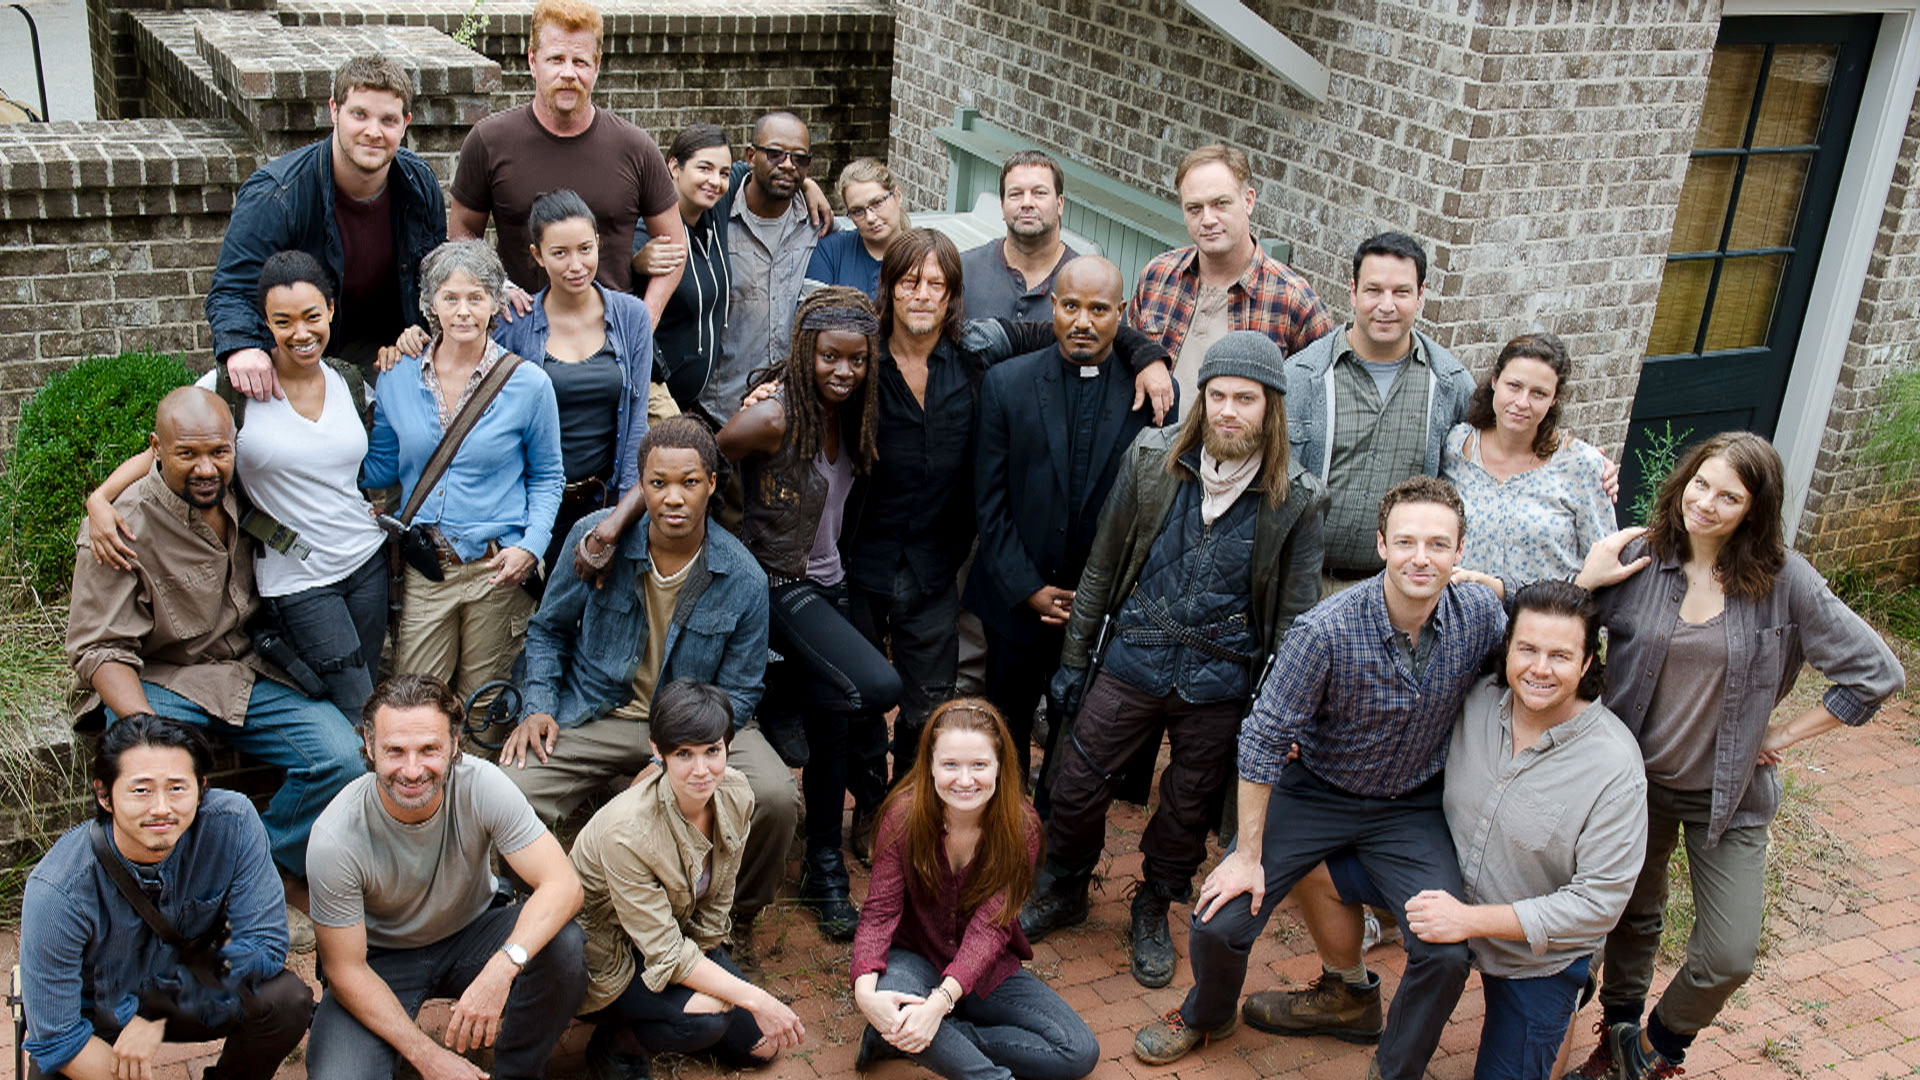 What Zombie Are You? Walking Dead cast